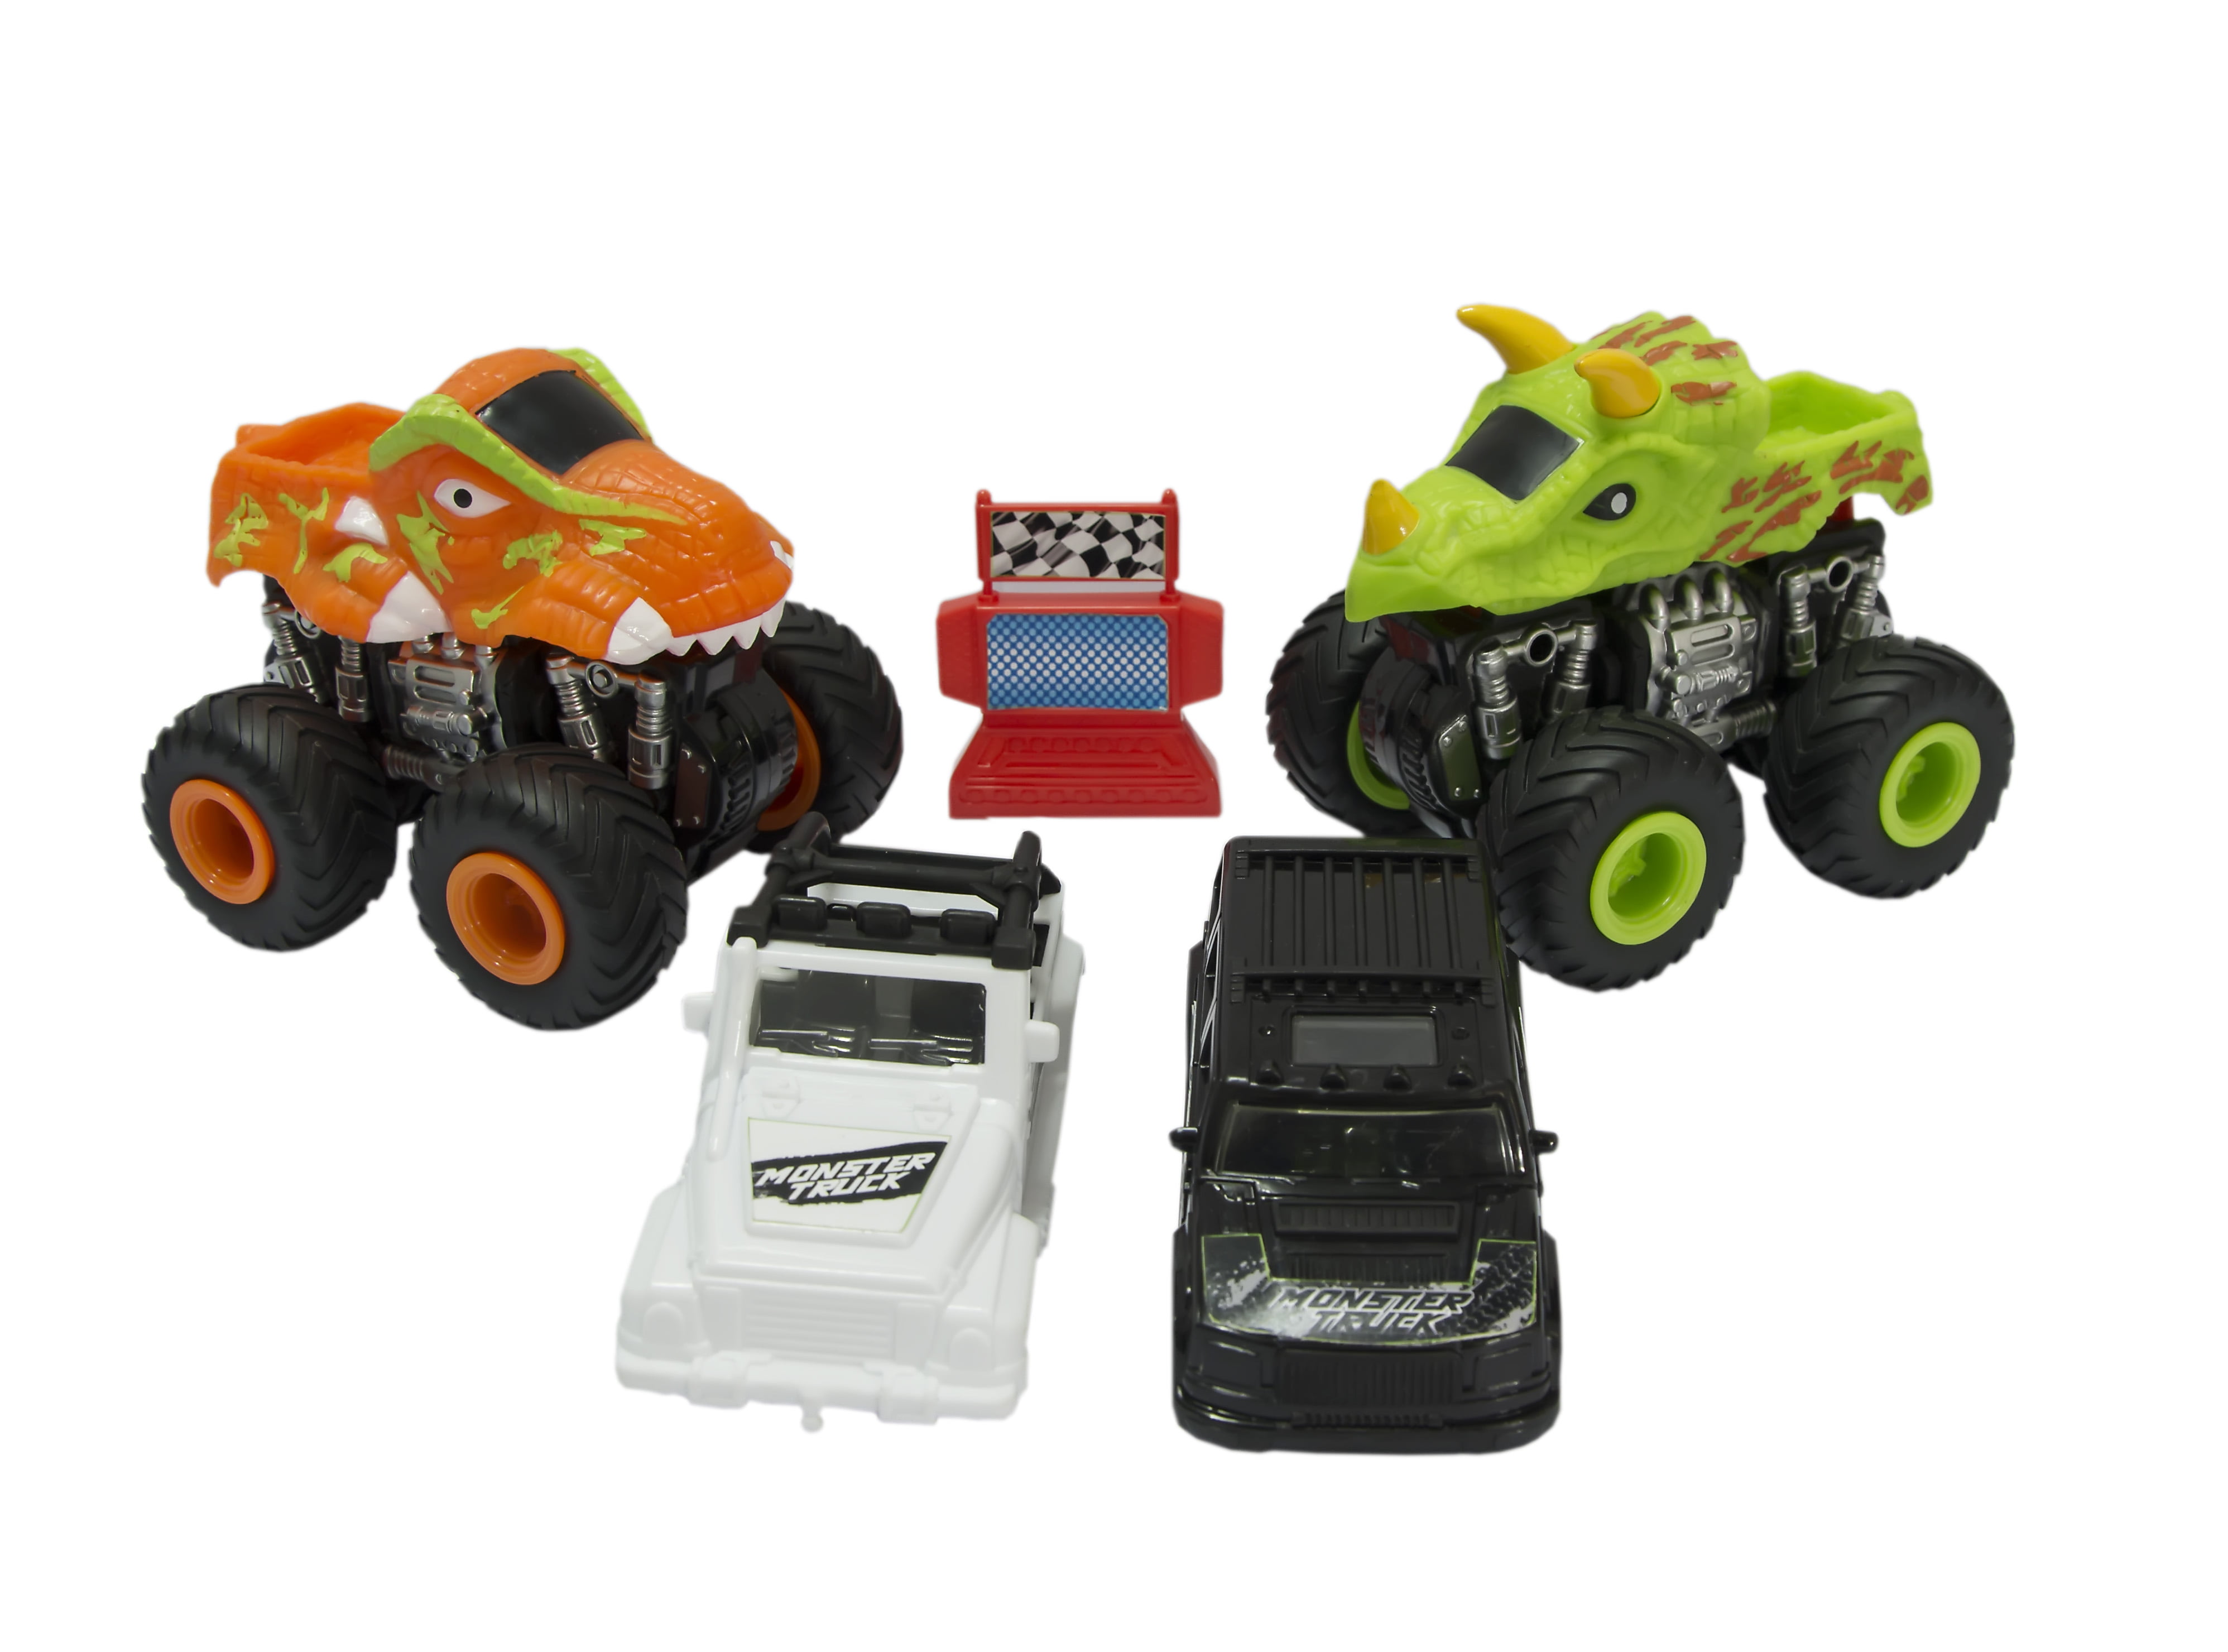 kid connection monster truck play set